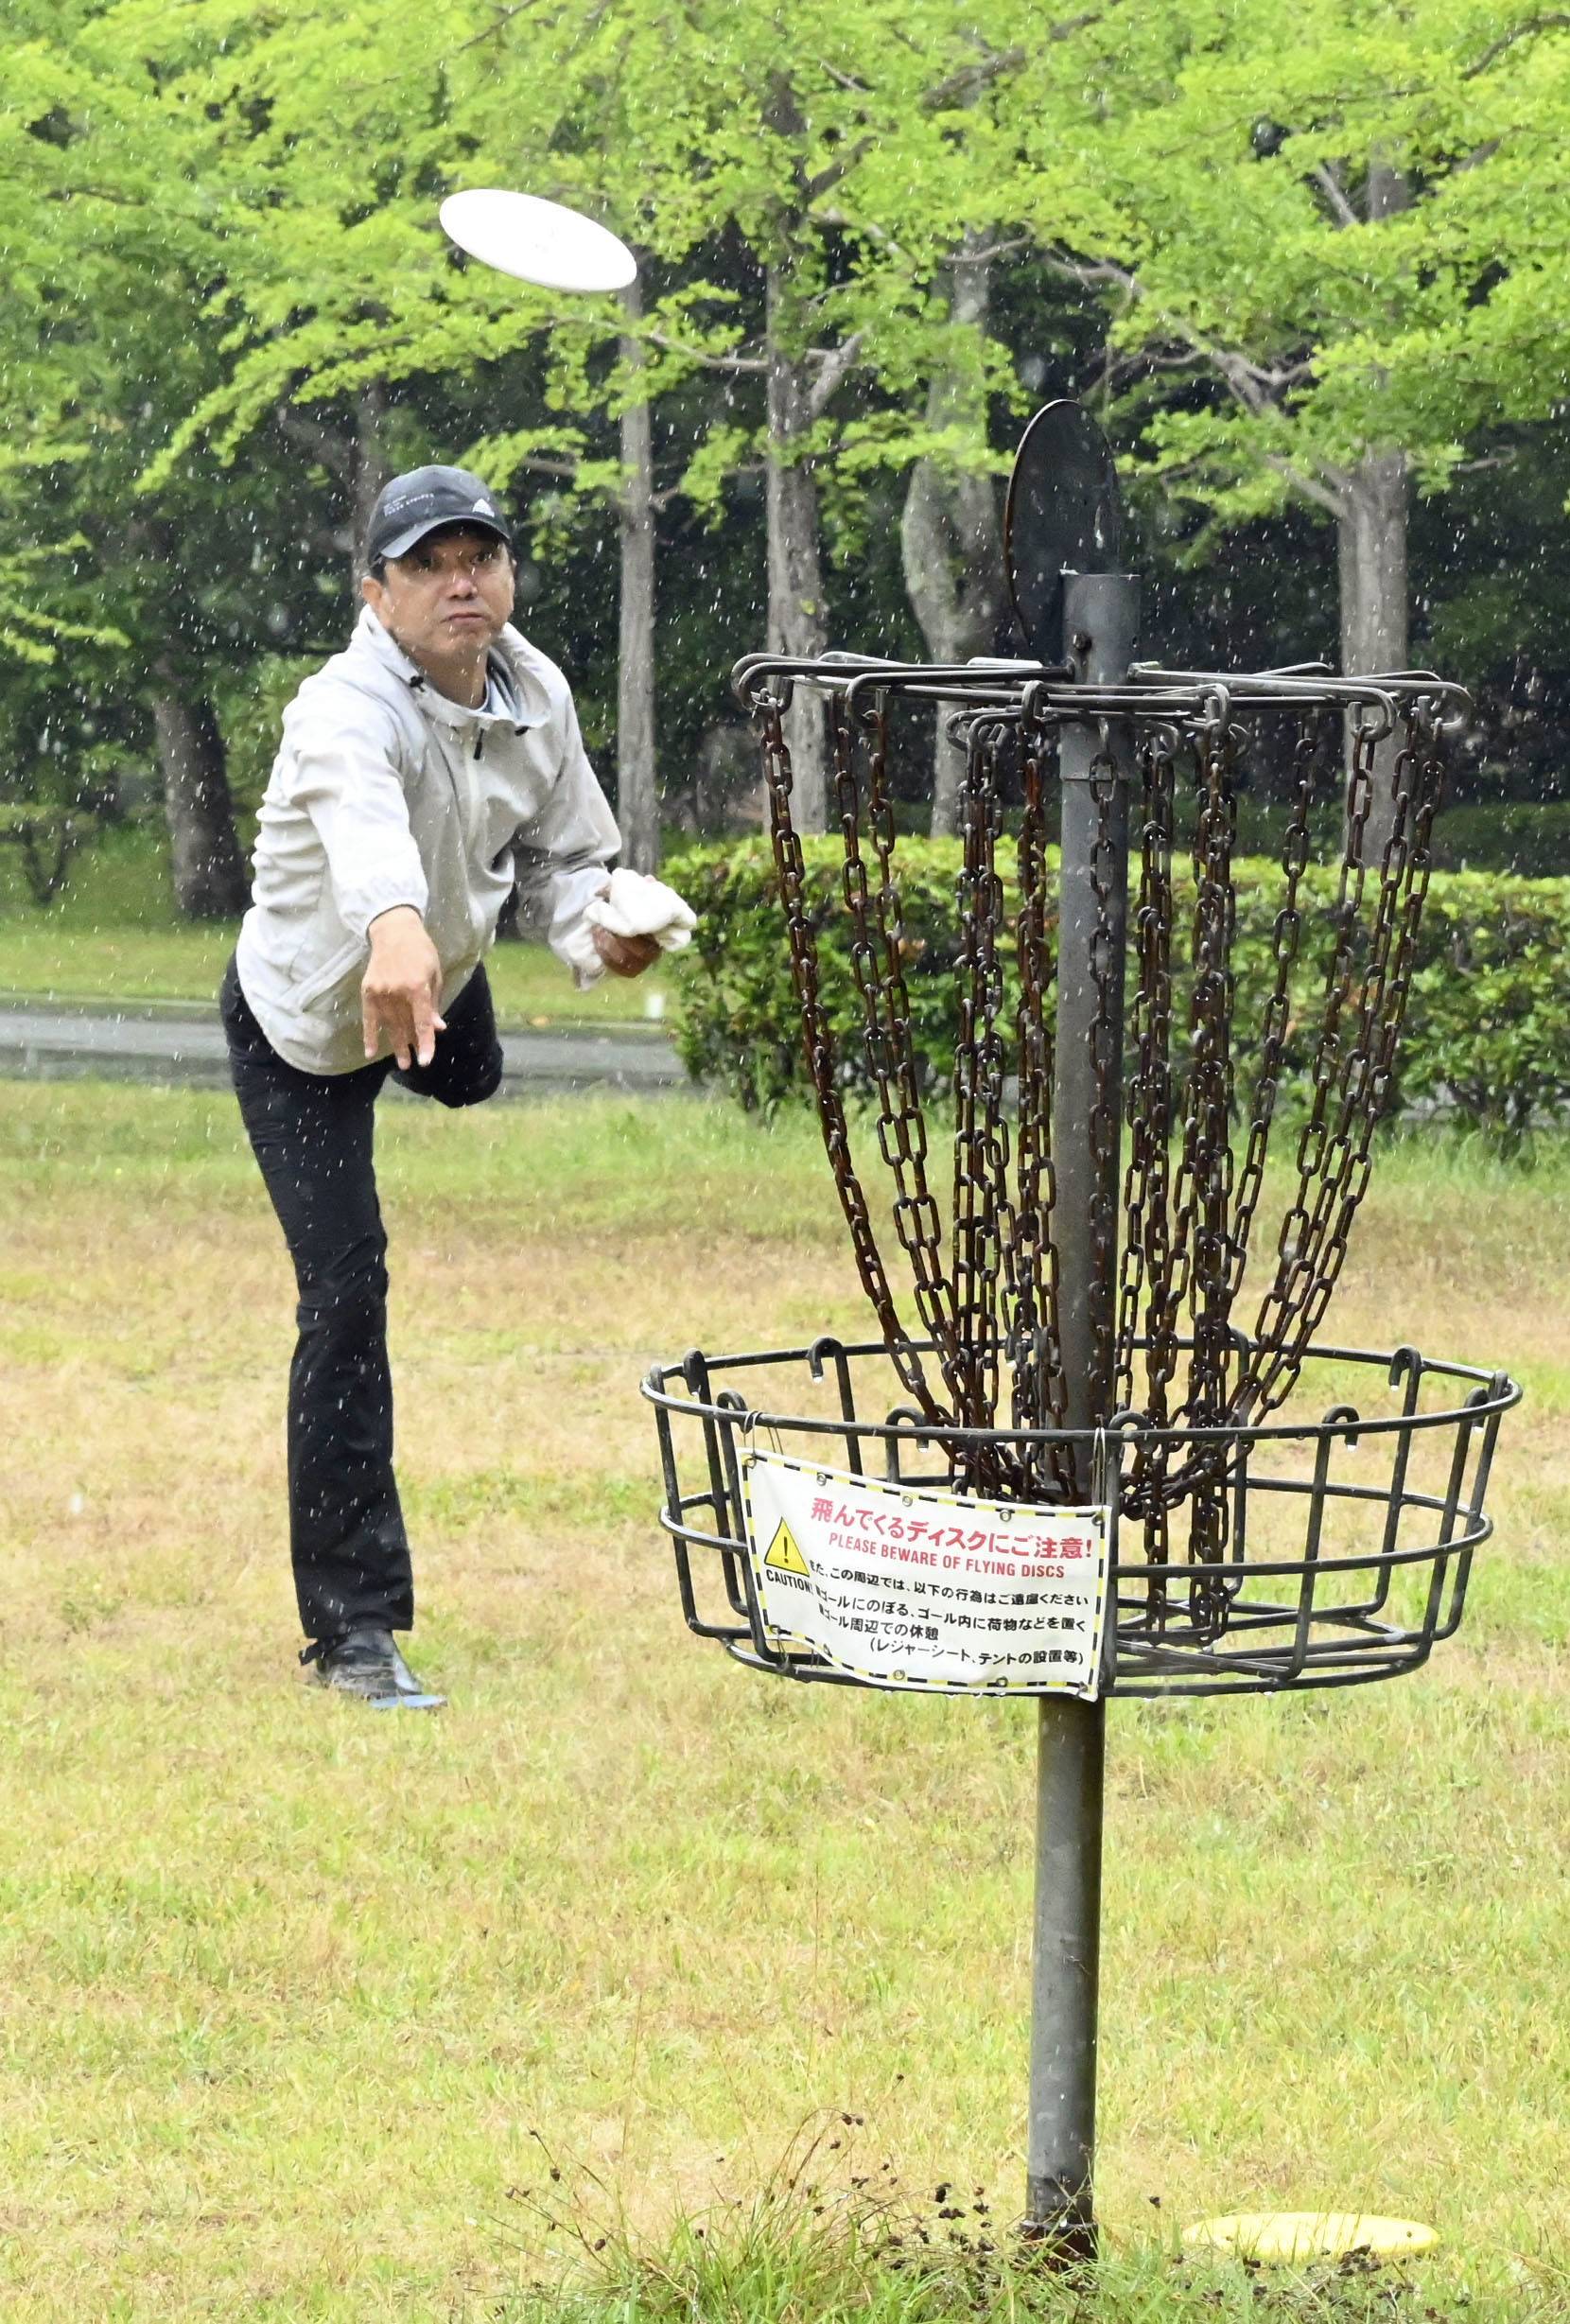 Disc golf taking flight as Japan looks for outdoor escape - The Japan Times